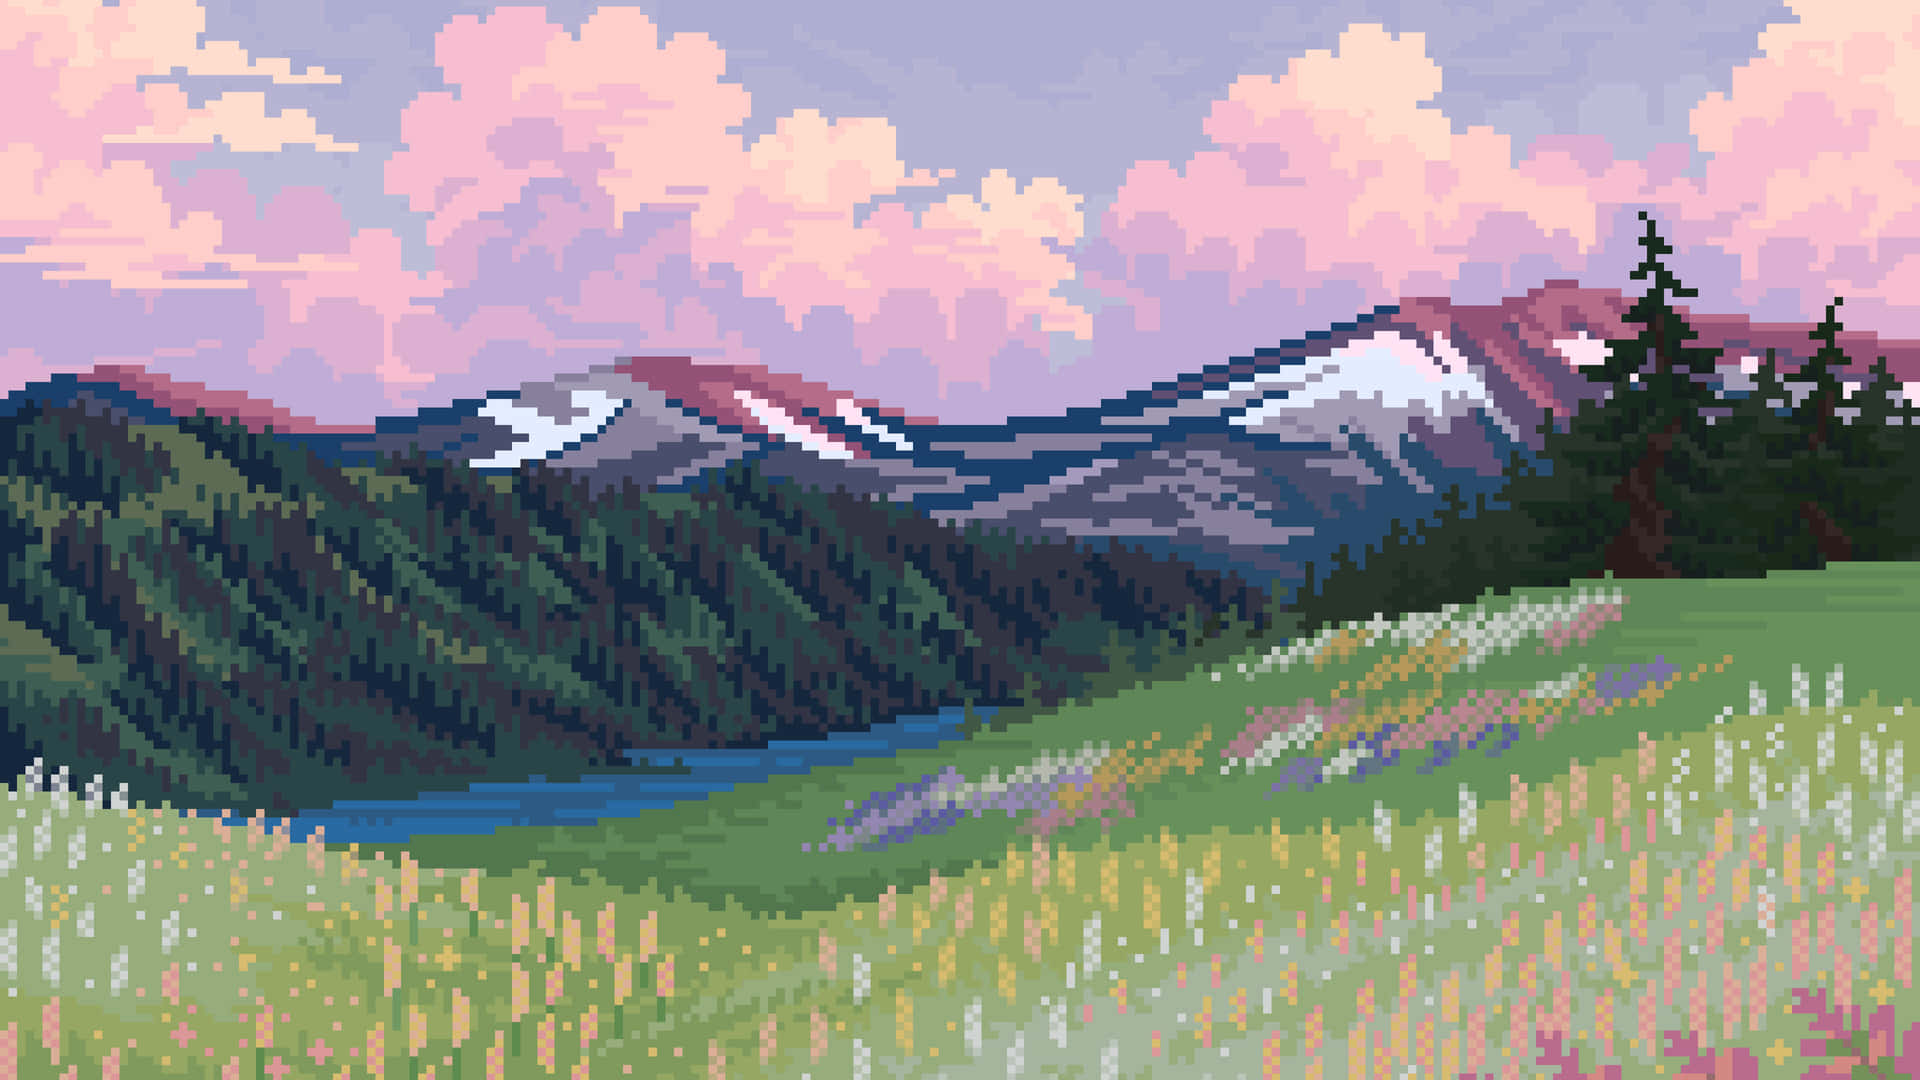 Pixel Art Of A Mountain Landscape With Flowers And Trees Wallpaper